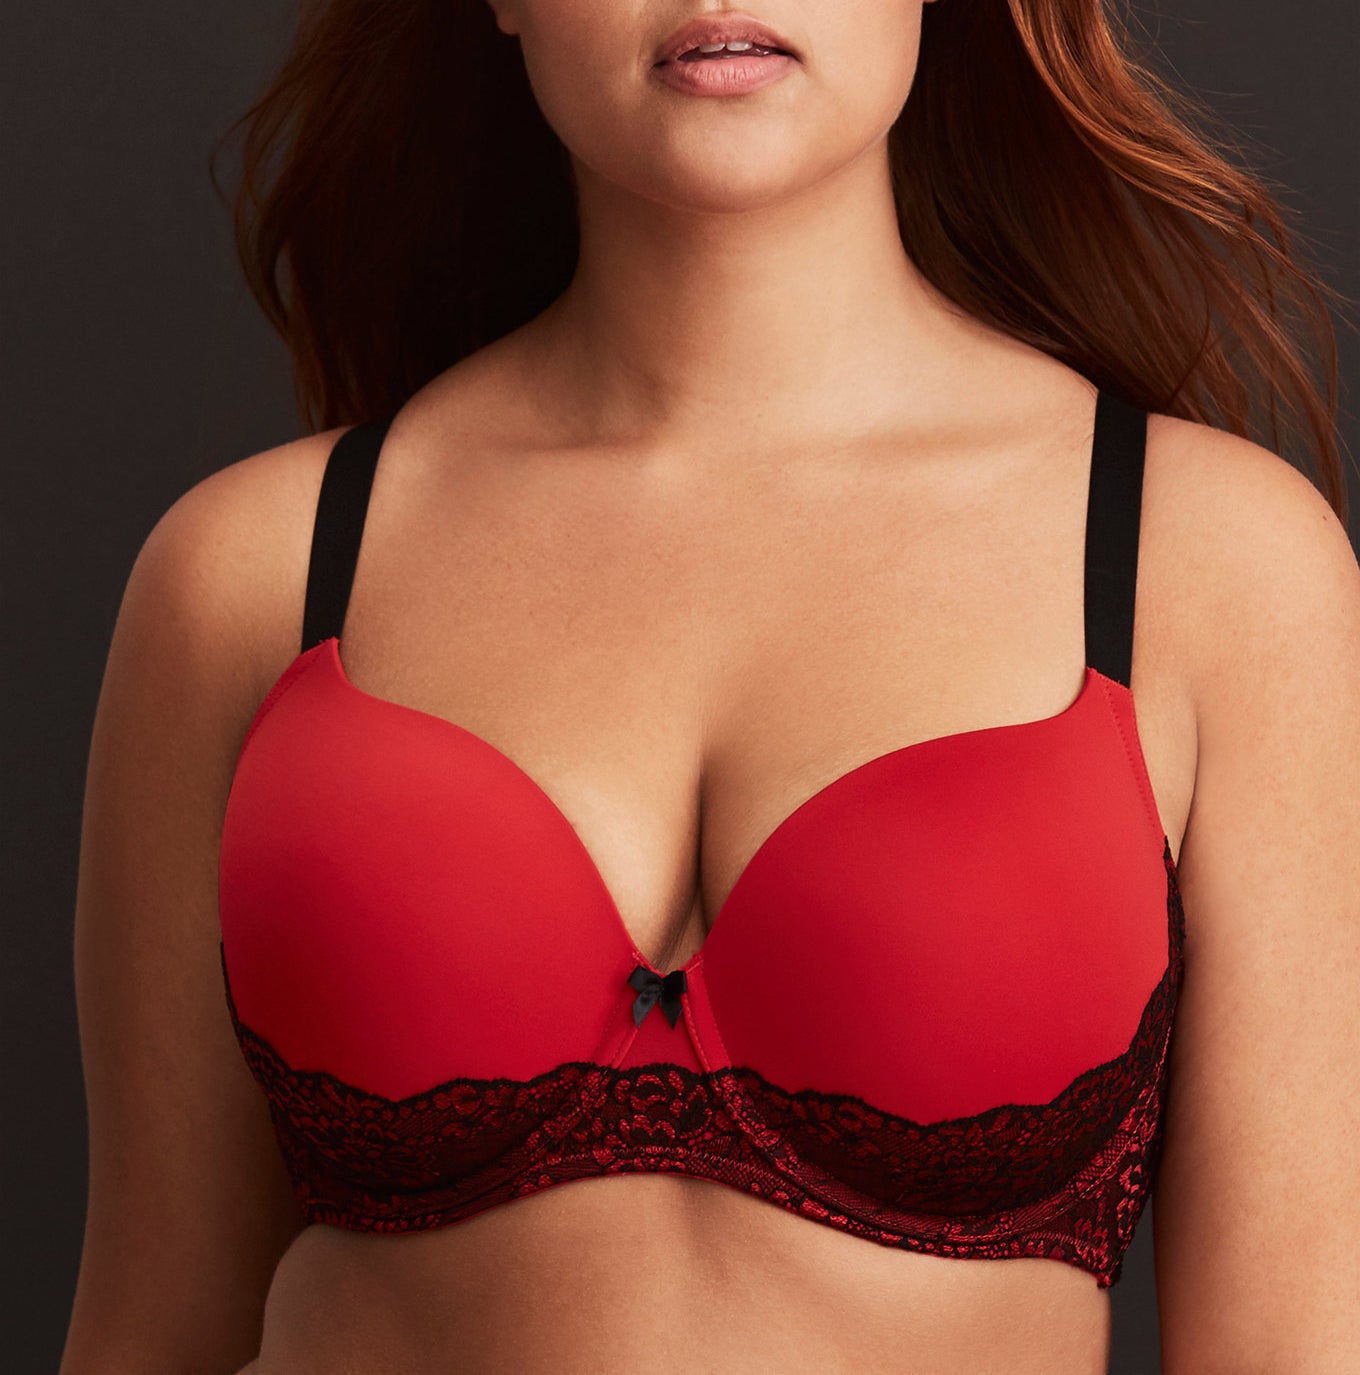 Curvy Girls, These Life-Changing Bras Are on Sale for $40
